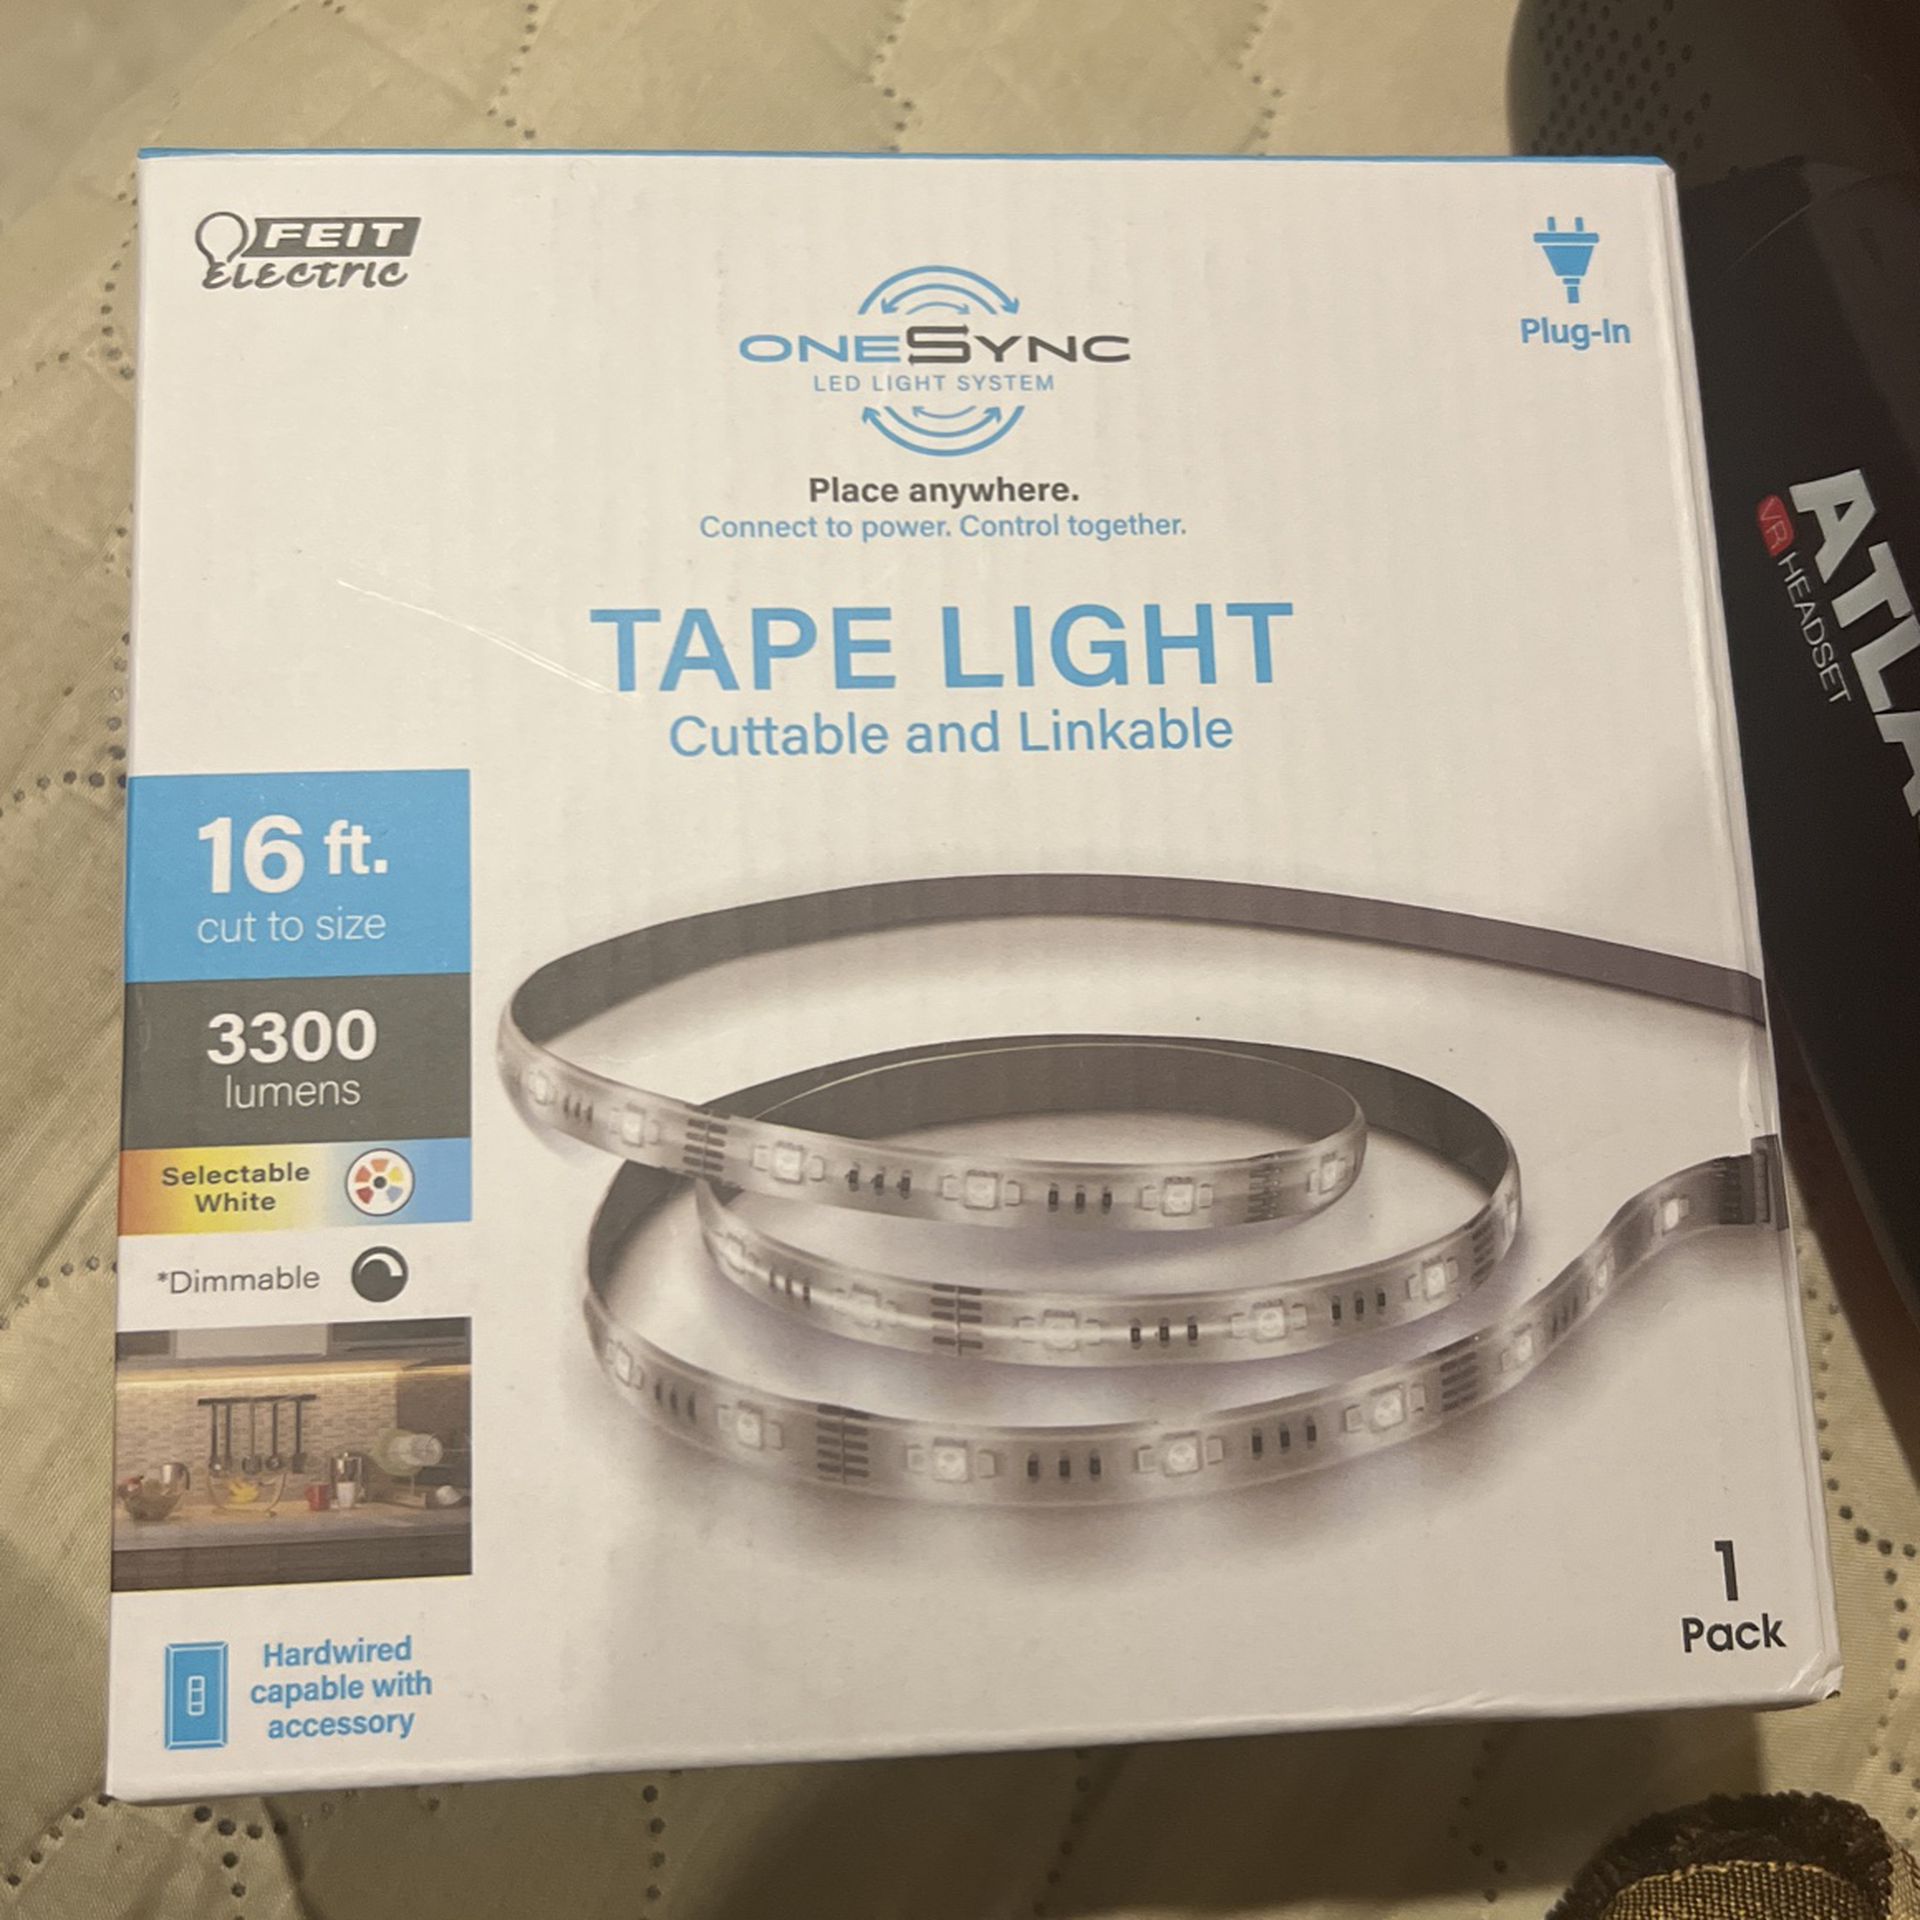 OneSync Tape Light Cut table and Linkable